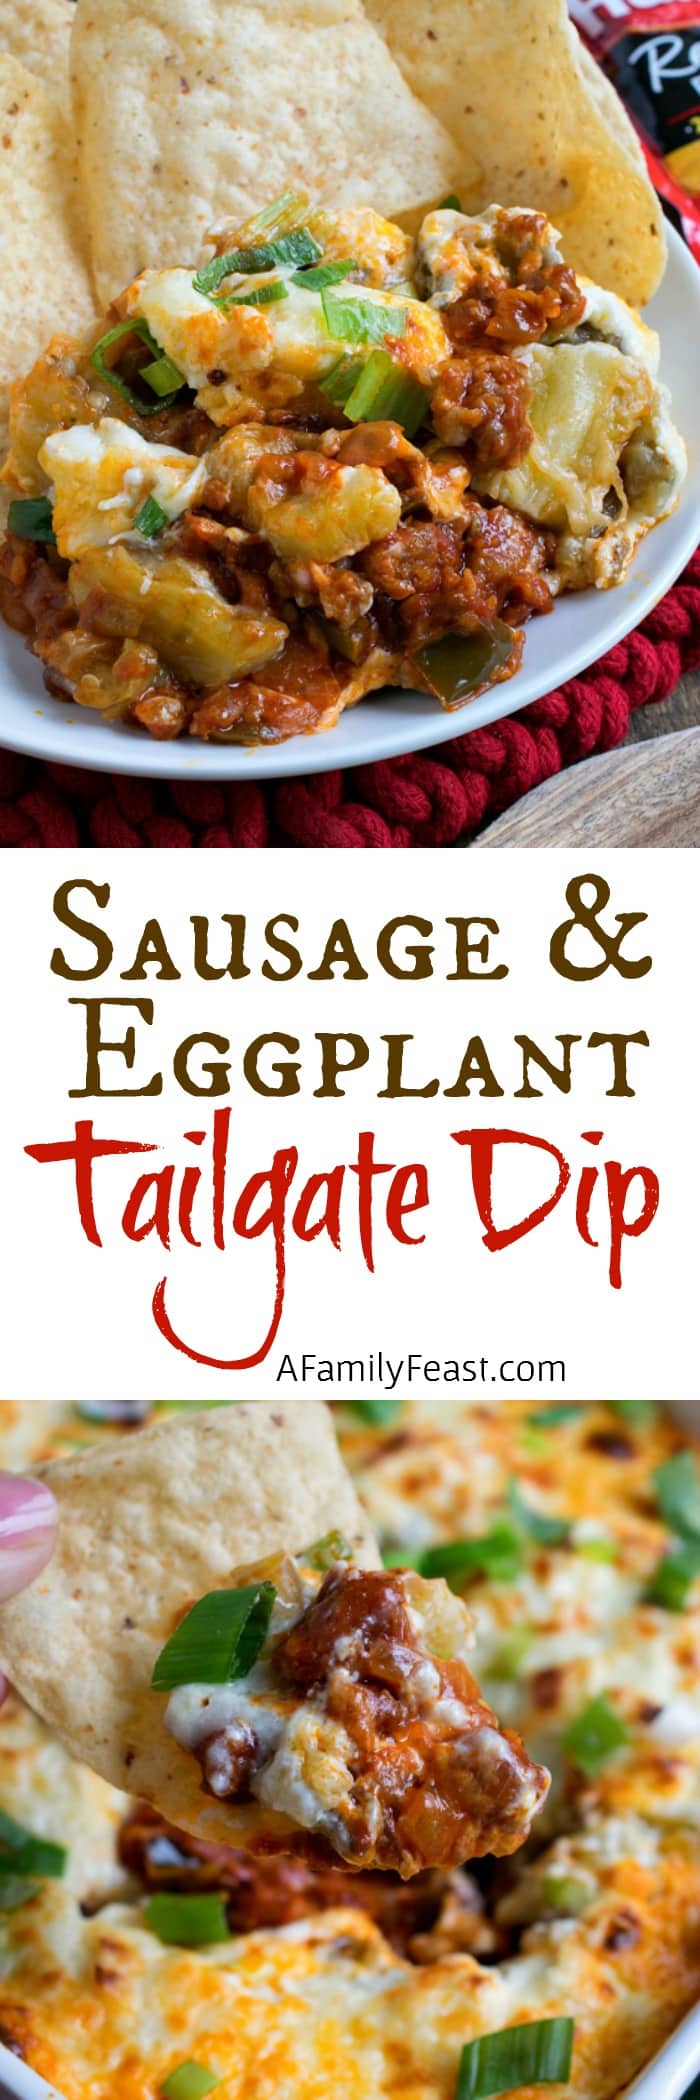 Italian Sausage and Eggplant Tailgate Dip - A perfect appetizer for game day parties and for tailgating, this delicious dip is loaded with flavor! #HuntsDifference